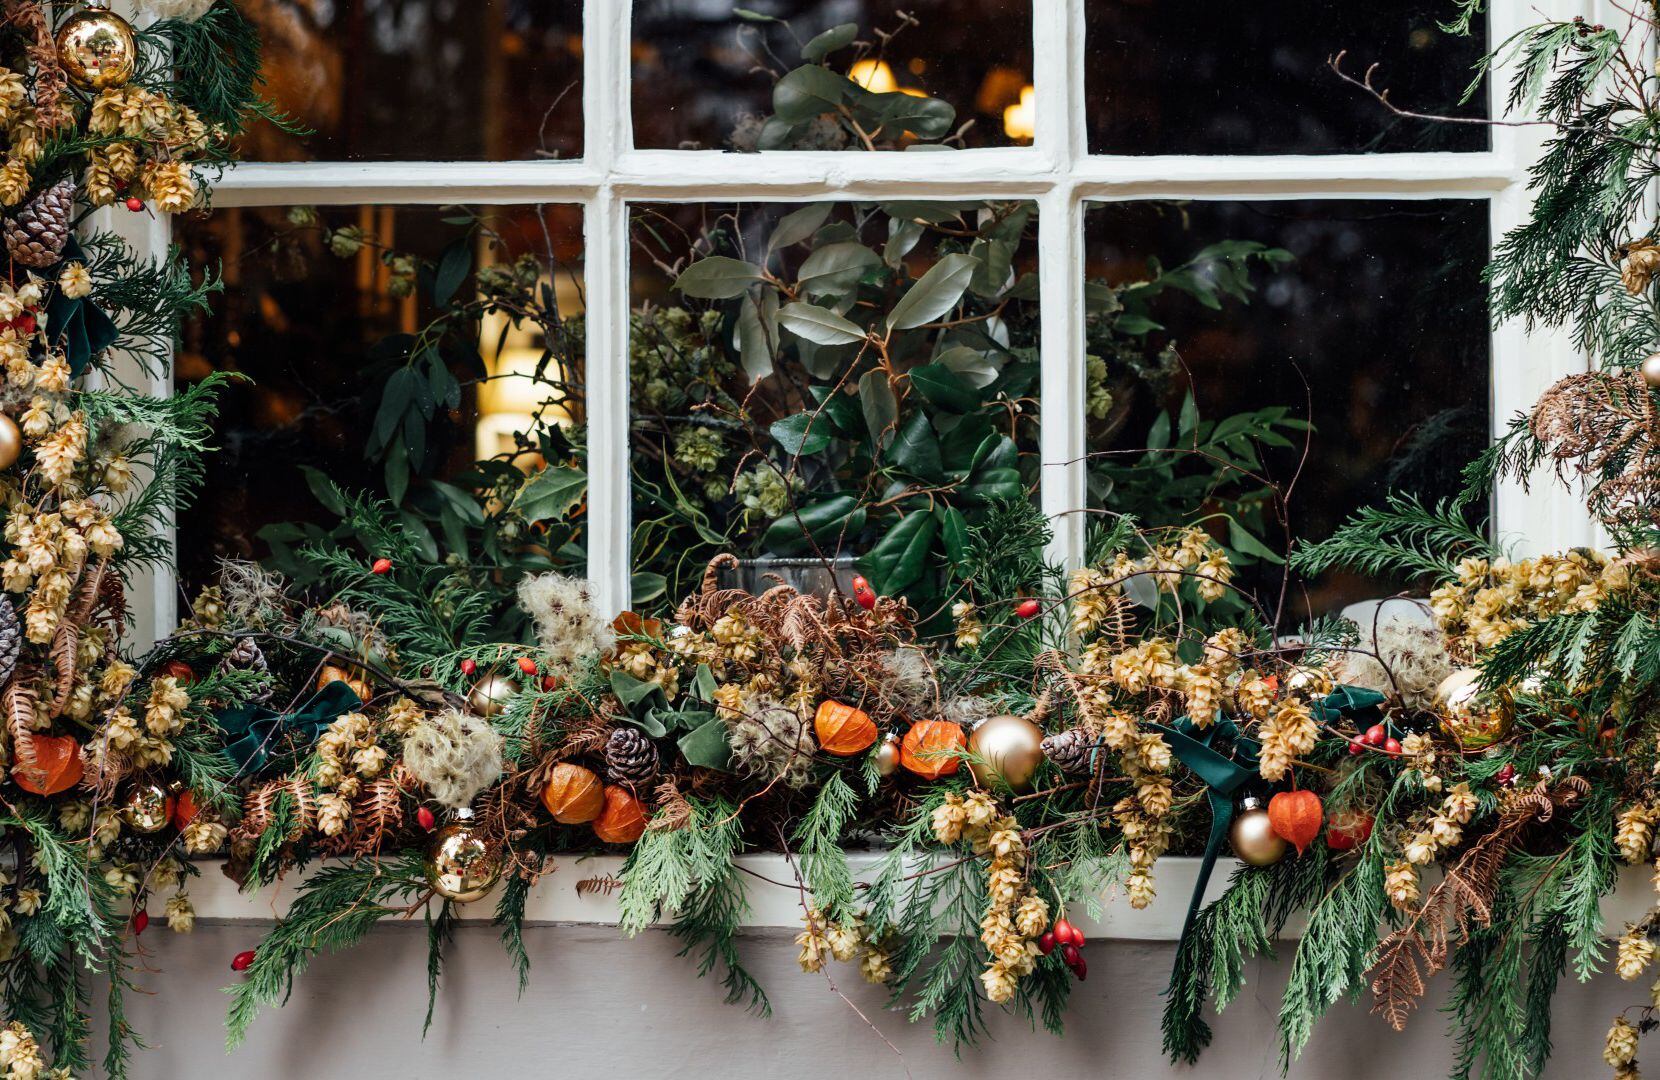 Holidays With These Ideas For Fresh Garland